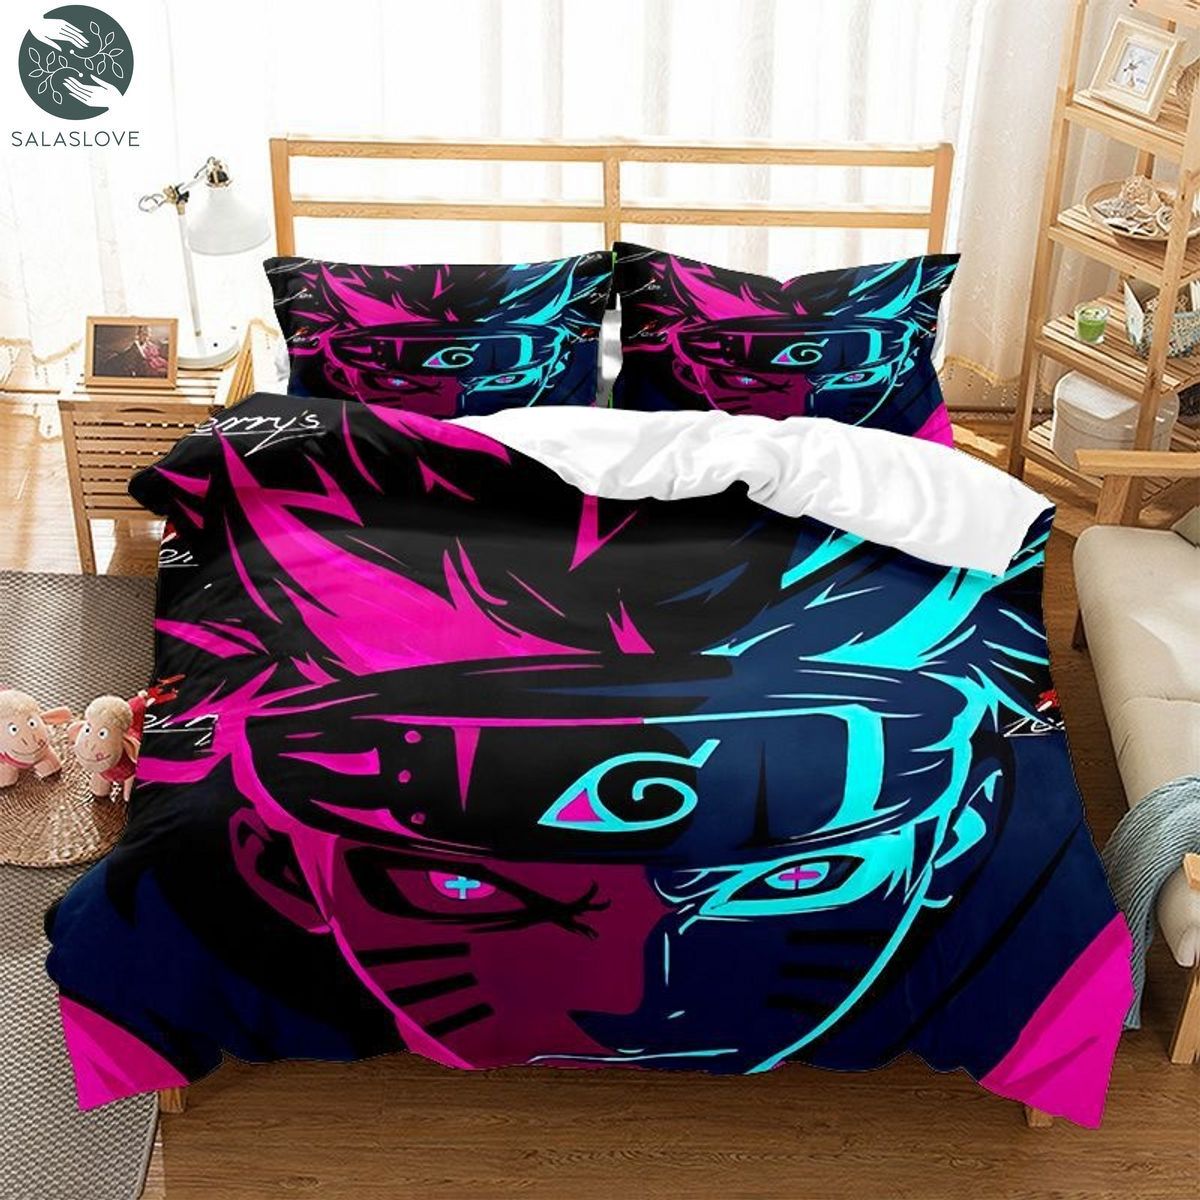 Naruto Bedding Set Duvet Cover Pillowcase Double Queen King Size Kids Bedroom TY8404